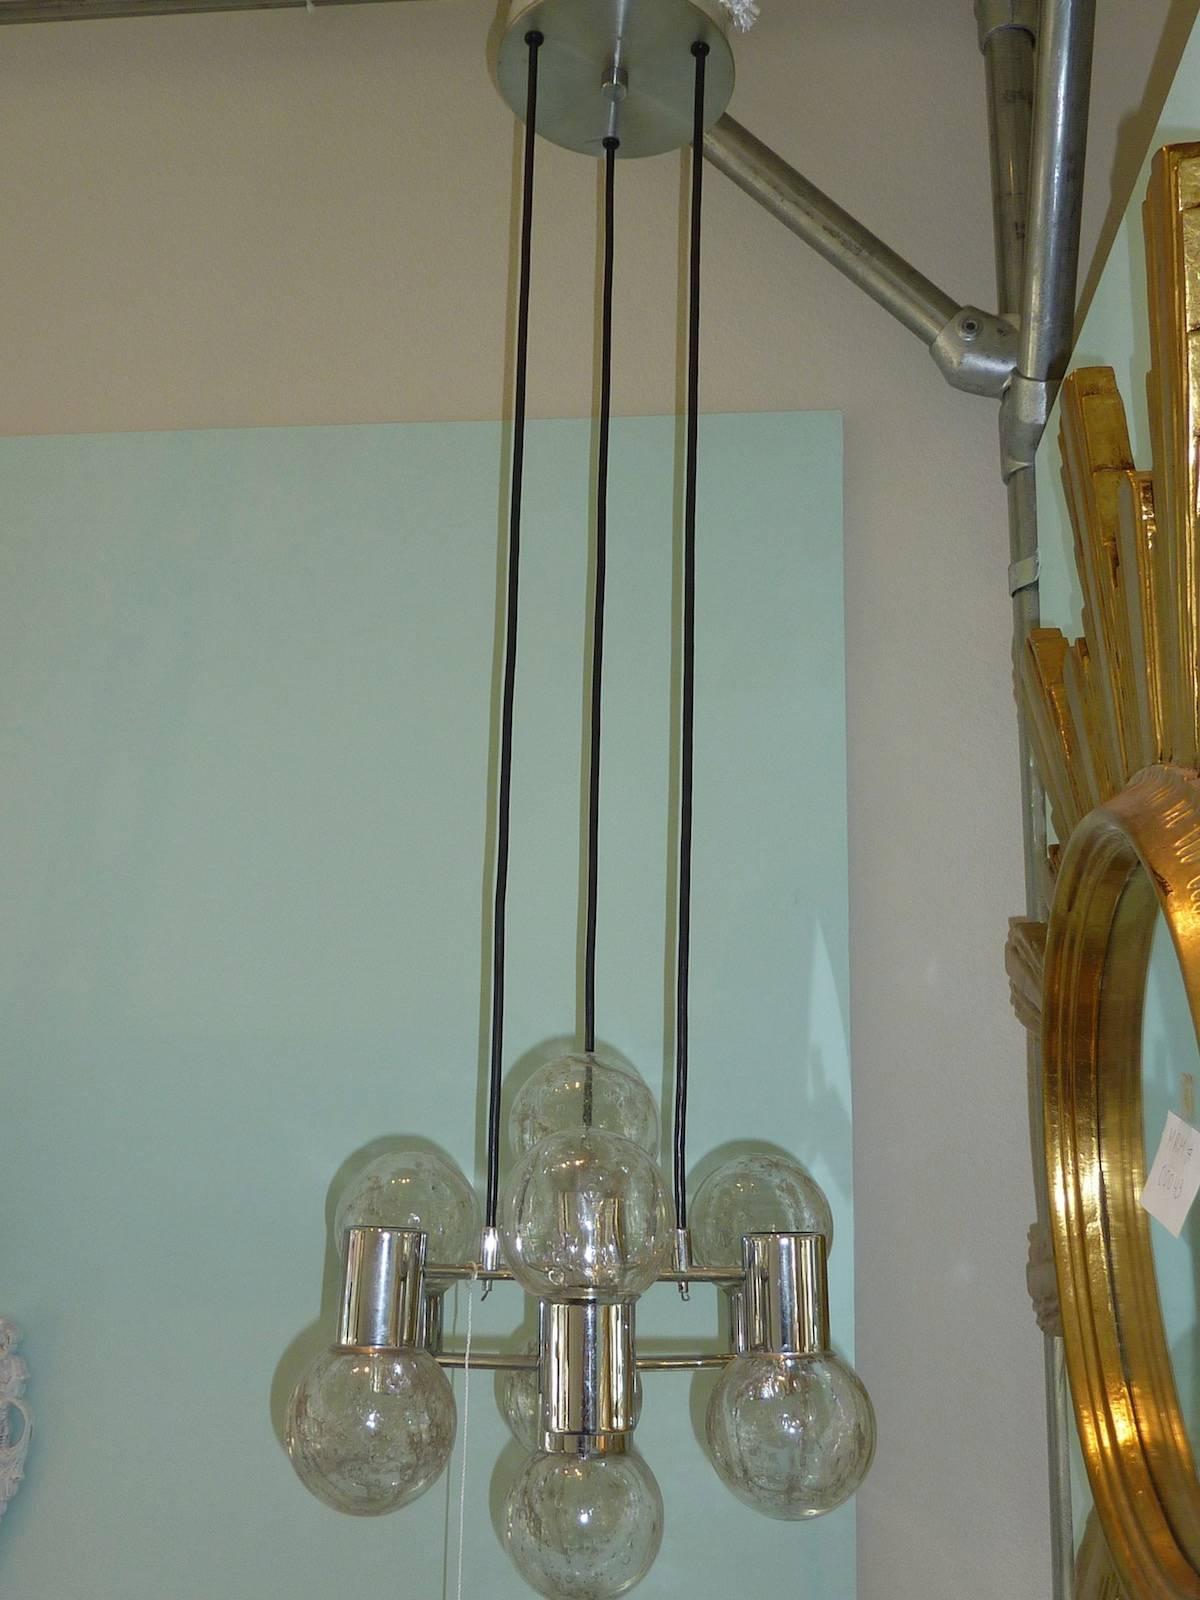 Mid-Century Modern chrome and glass ball pendant light fixture. The sculptural fixture has sockets which project both up and down, giving good illumination. The balls suspend from original cording and canopy.